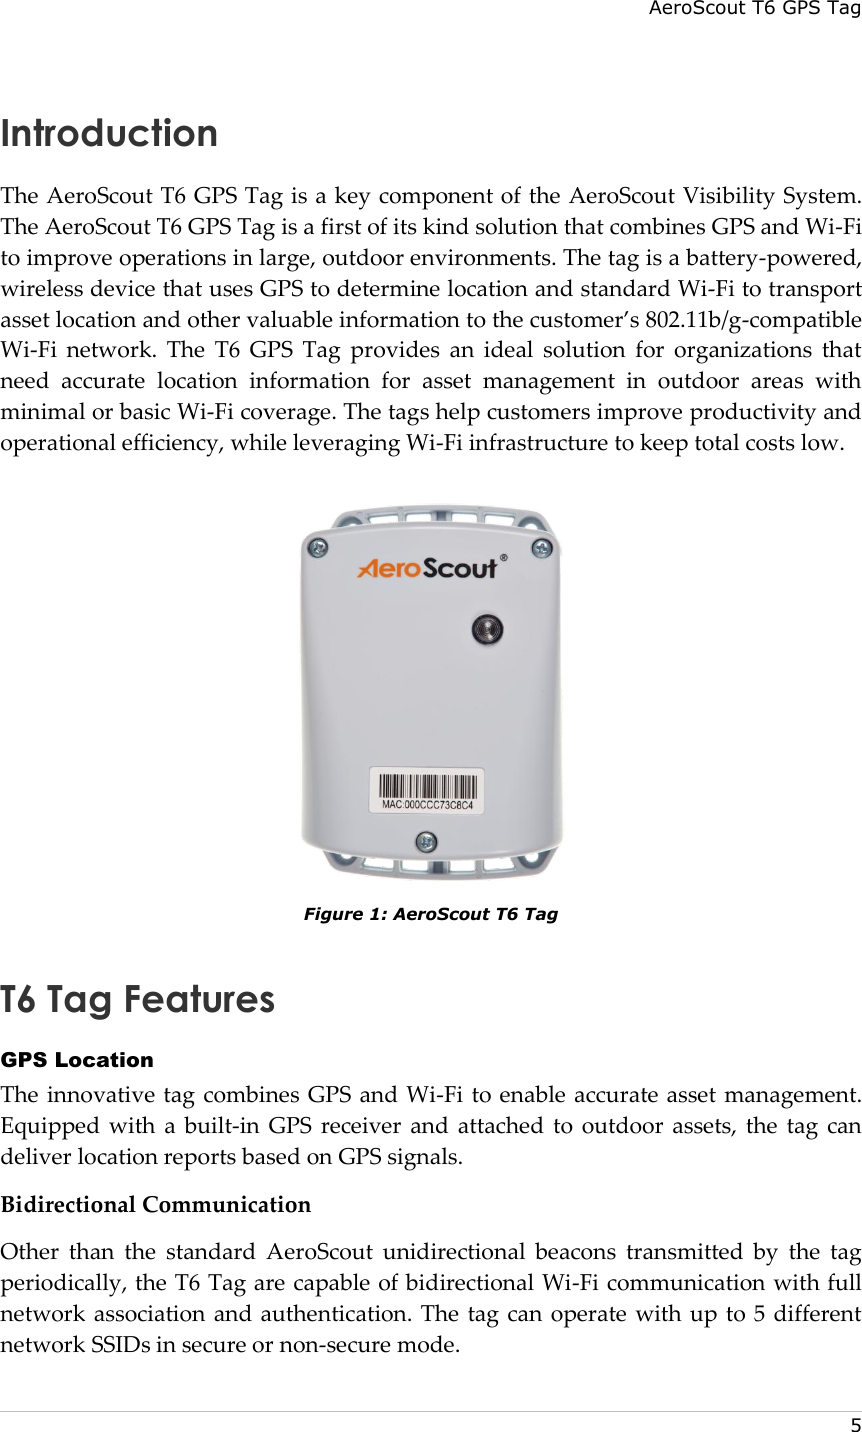 AeroScout T6 GPS Tag    5 Introduction The AeroScout T6 GPS Tag is a key component of the AeroScout Visibility System. The AeroScout T6 GPS Tag is a first of its kind solution that combines GPS and Wi-Fi to improve operations in large, outdoor environments. The tag is a battery-powered, wireless device that uses GPS to determine location and standard Wi-Fi to transport asset location and other valuable information to the customer’s 802.11b/g-compatible Wi-Fi  network.  The  T6  GPS  Tag  provides  an  ideal  solution  for  organizations  that need  accurate  location  information  for  asset  management  in  outdoor  areas  with minimal or basic Wi-Fi coverage. The tags help customers improve productivity and operational efficiency, while leveraging Wi-Fi infrastructure to keep total costs low.  Figure 1: AeroScout T6 Tag T6 Tag Features GPS Location The innovative tag combines GPS  and Wi-Fi to enable accurate asset management. Equipped with a  built-in  GPS  receiver  and  attached  to  outdoor  assets, the  tag  can deliver location reports based on GPS signals. Bidirectional Communication Other  than  the  standard  AeroScout  unidirectional  beacons  transmitted  by  the  tag periodically, the T6 Tag are capable of bidirectional Wi-Fi communication with full network association and authentication. The tag can operate with up to 5 different network SSIDs in secure or non-secure mode. 